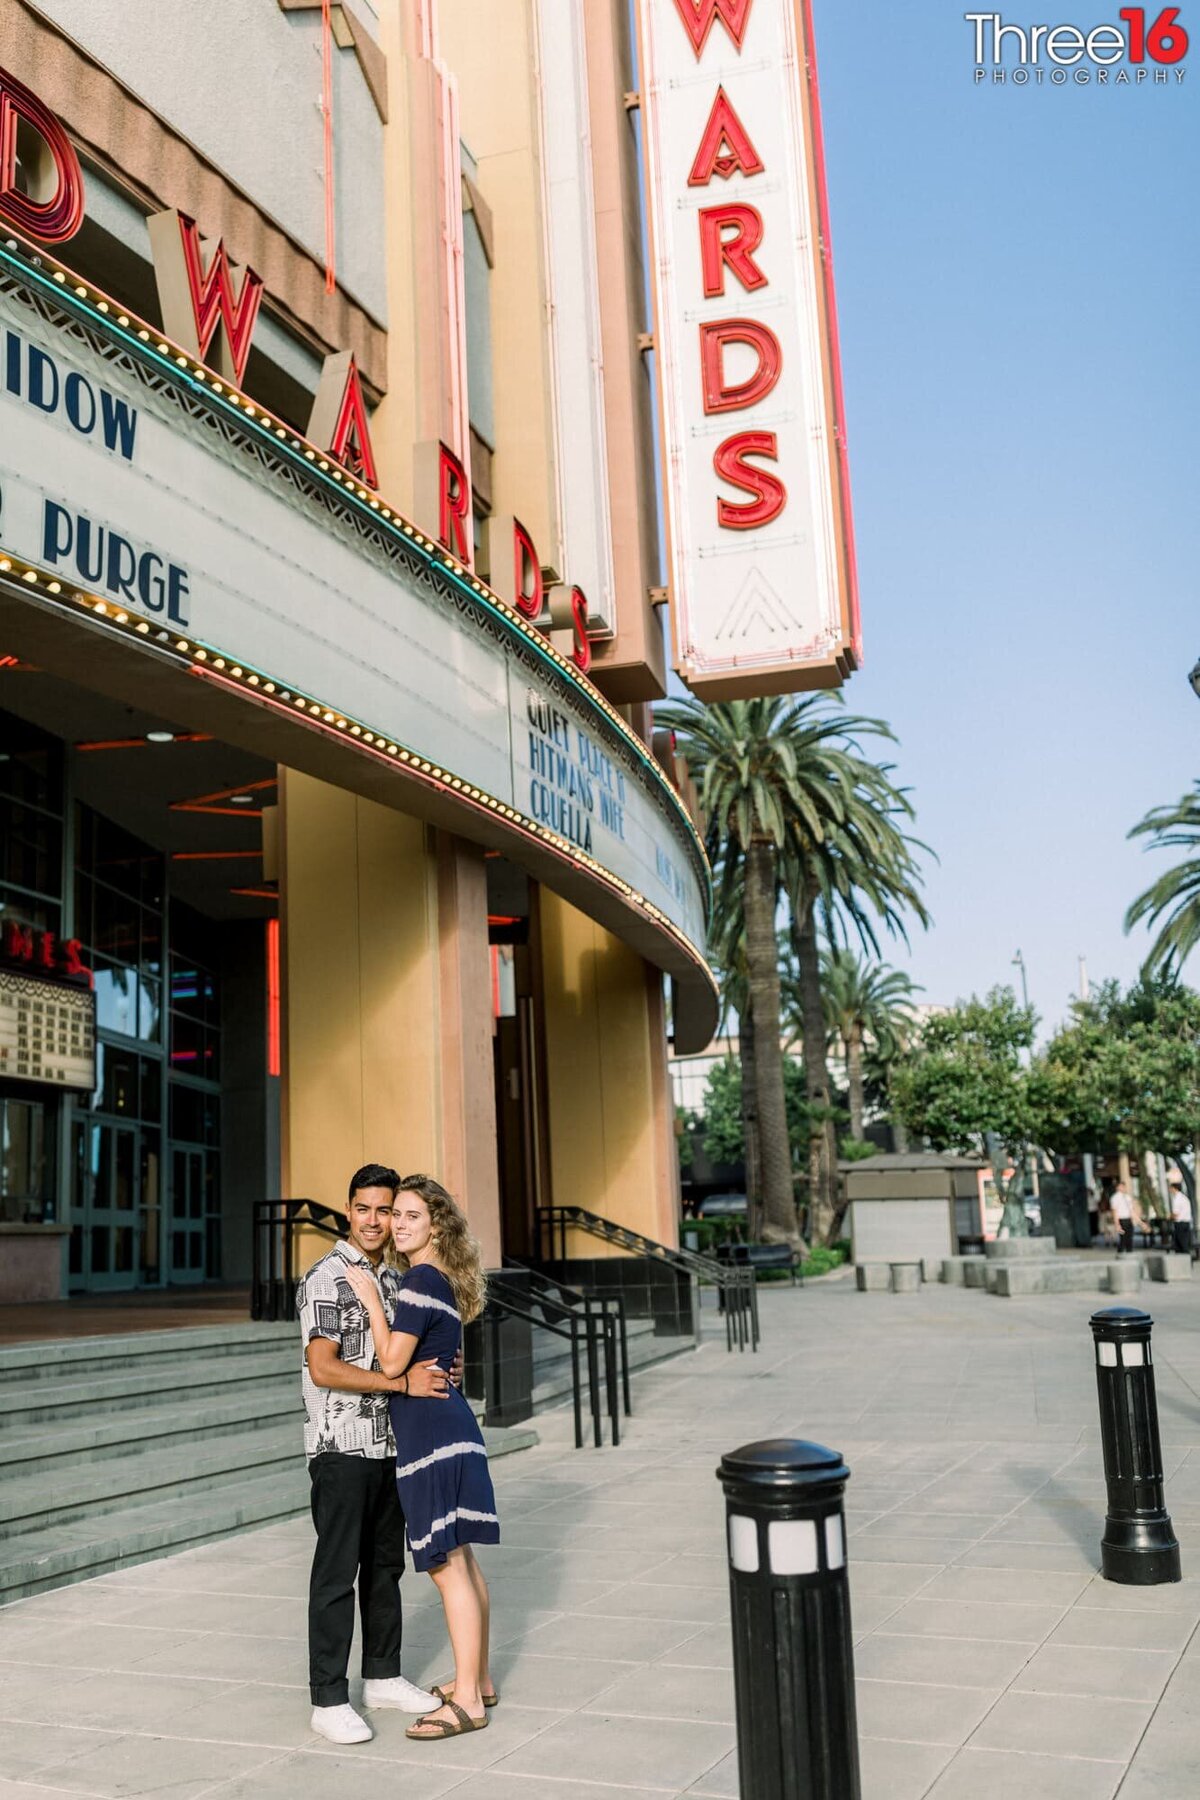 Engaged couple embrace each other as they pose for photos in front of the movie theater in Downtown Brea